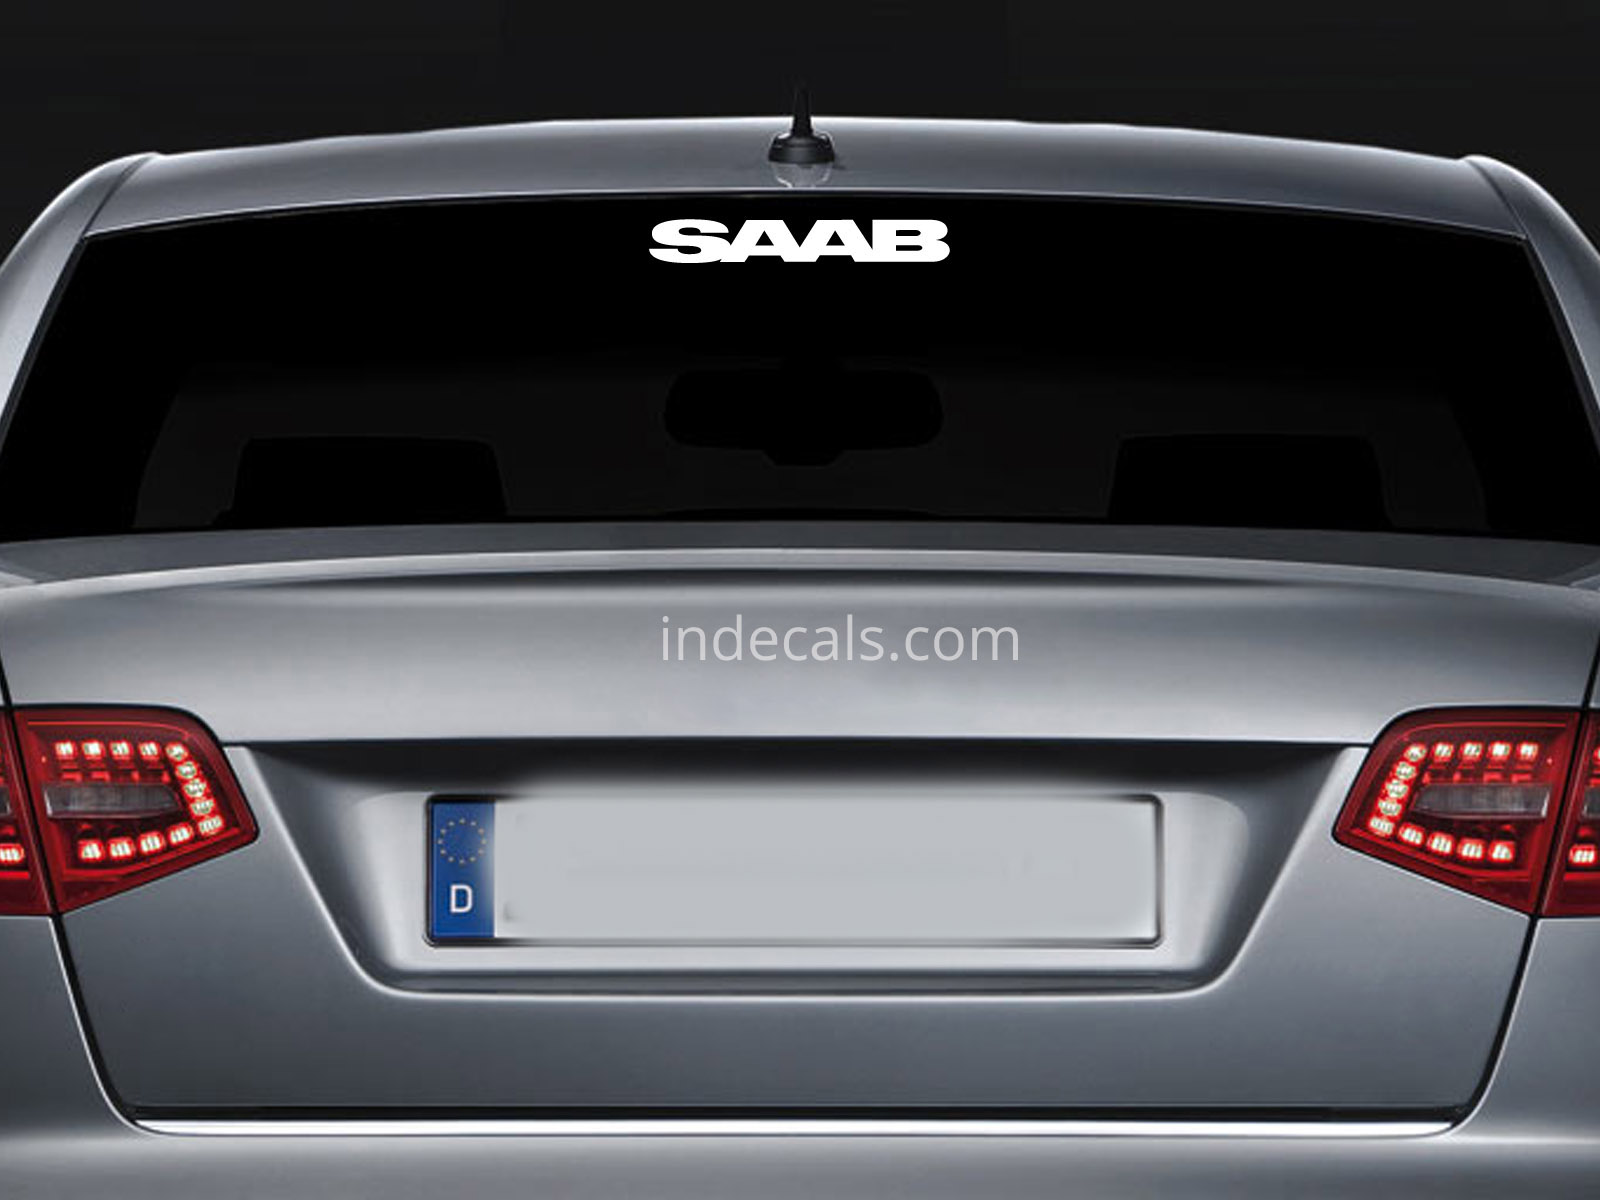 1 x Saab Sticker for Windshield or Back Window - White